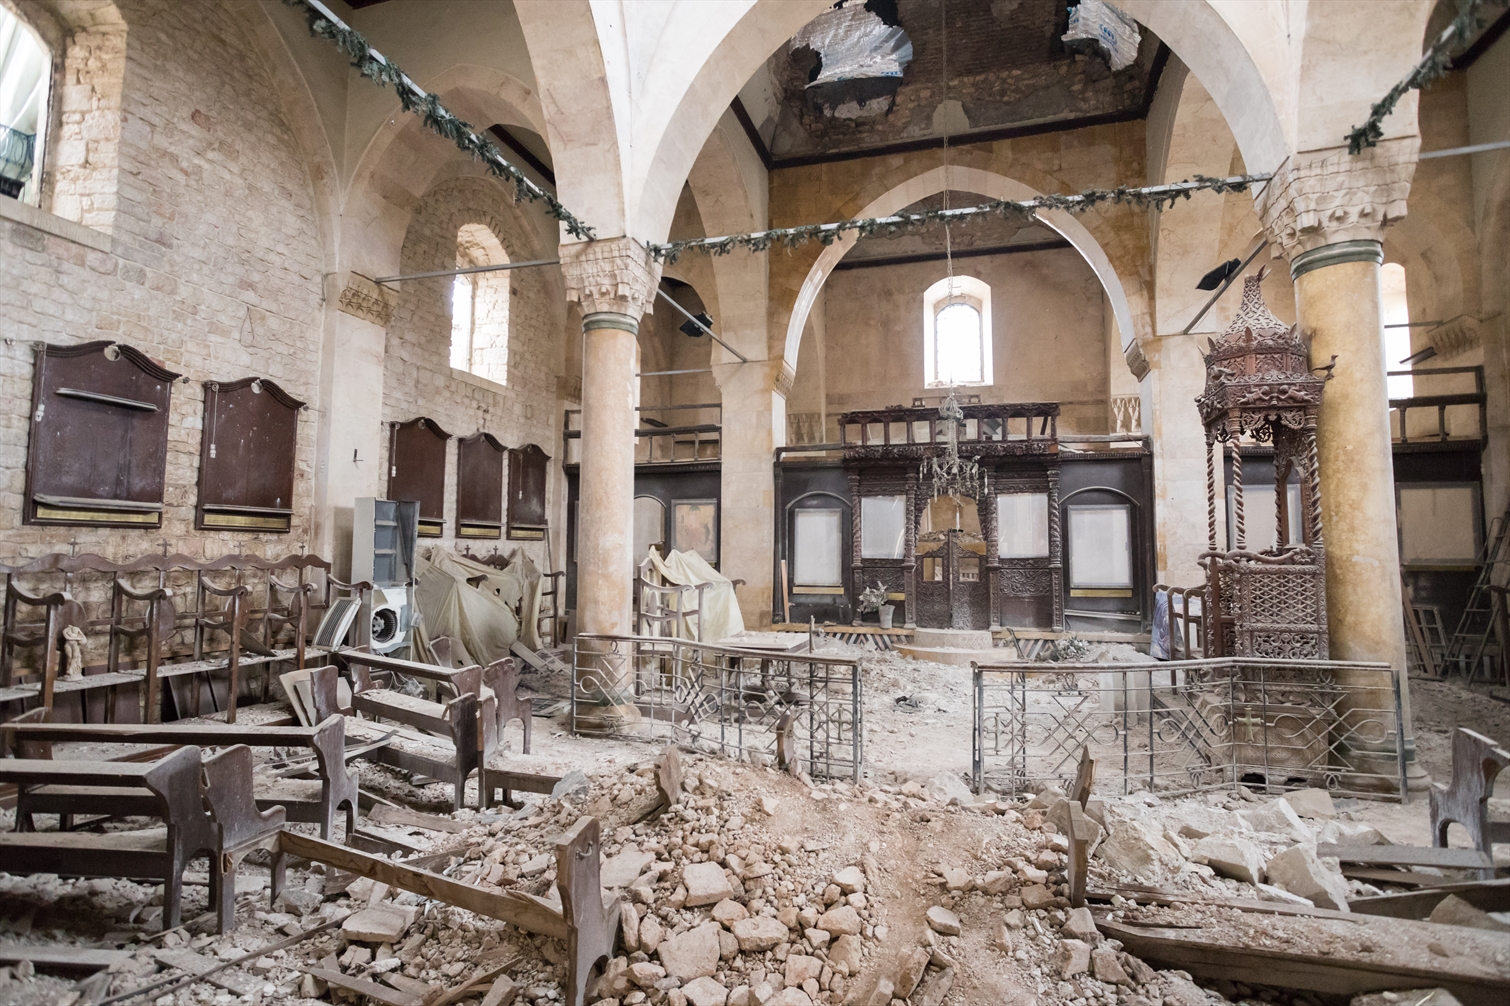 The shattered interior of the heavily damaged Greek Orthodox church in the old quarter of Aleppo (Open Doors International)